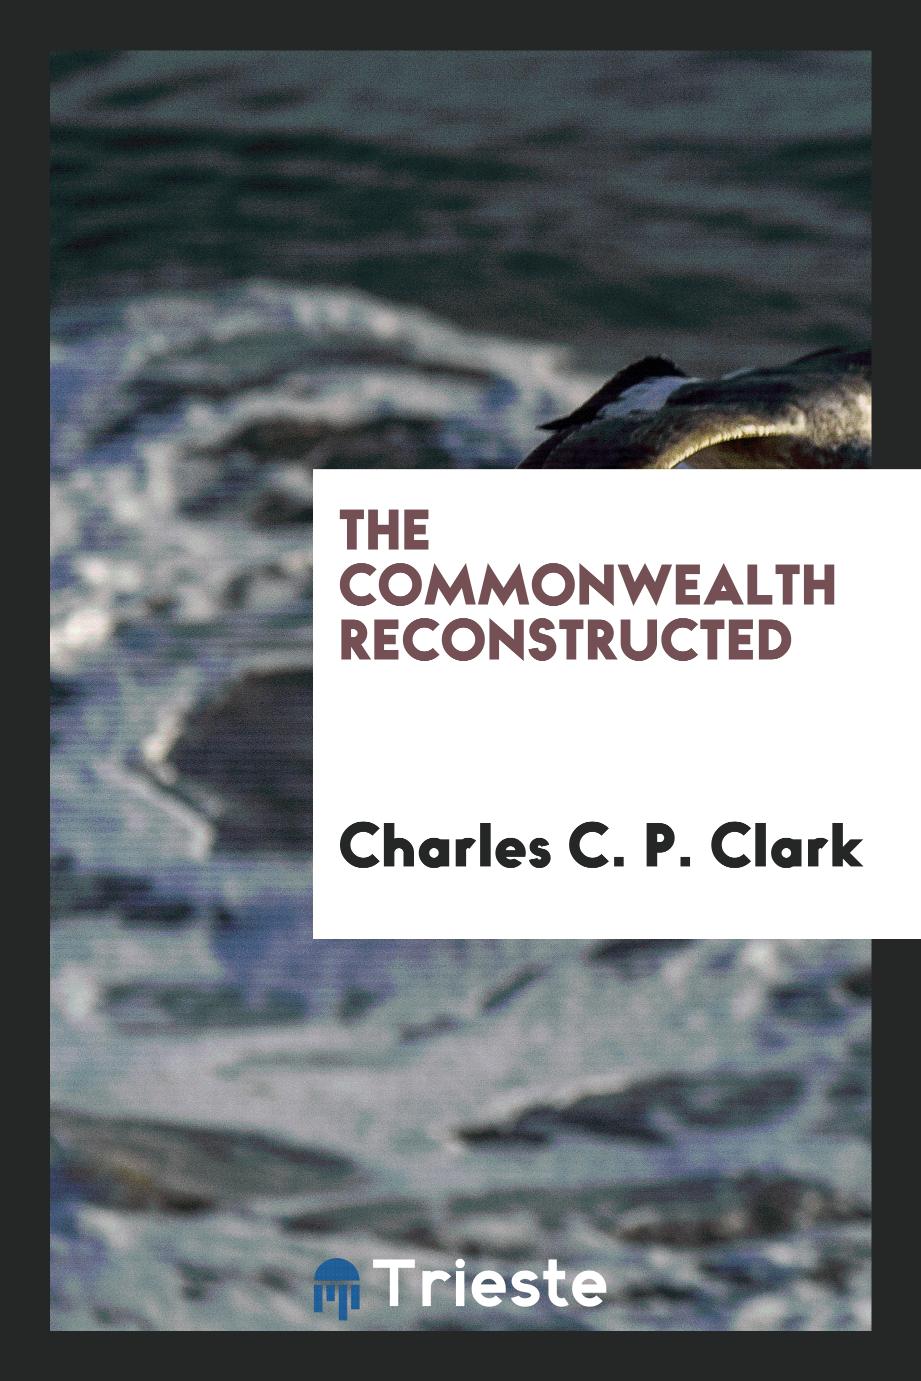 The Commonwealth reconstructed